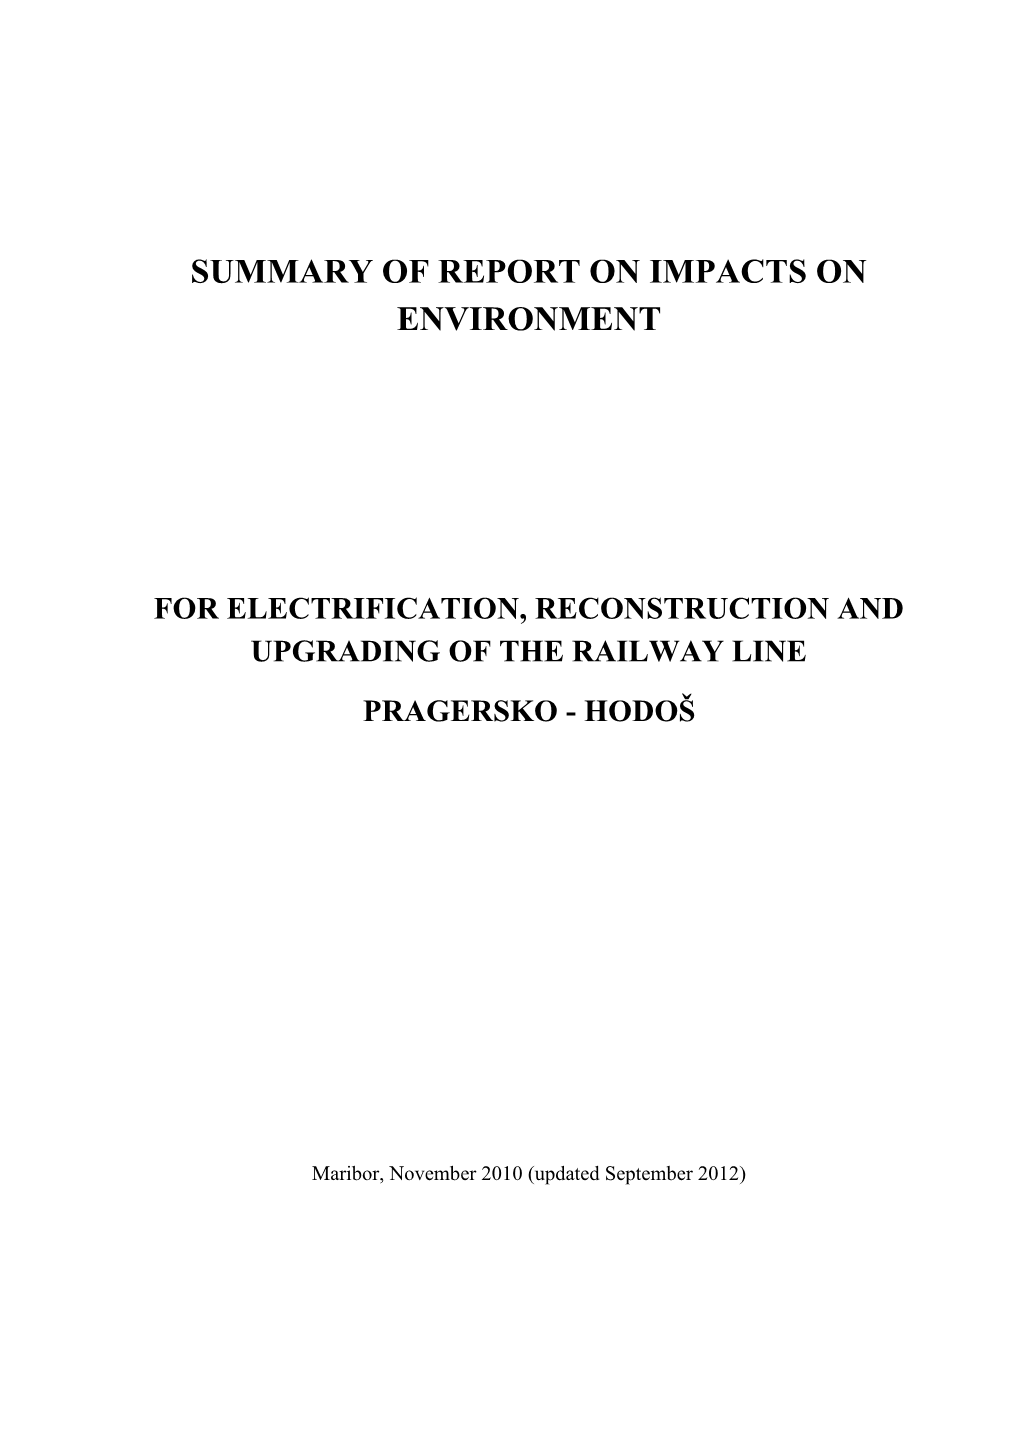 Summary of Report on Impacts on Environment